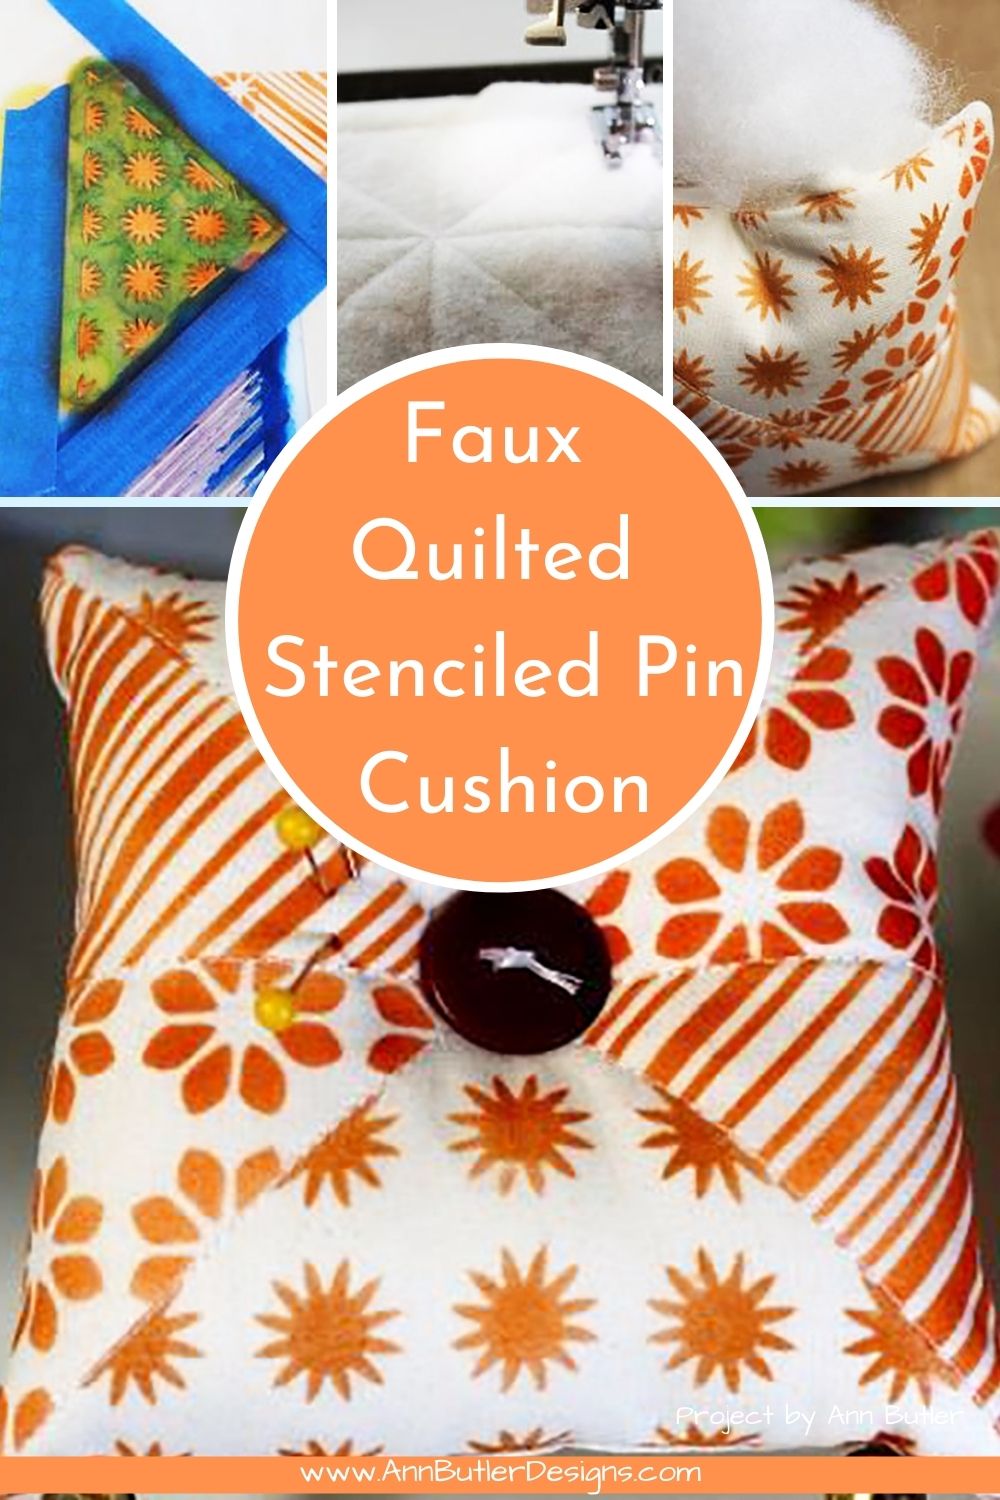 Faux Quilted Stenciled Pin Cushion Pin